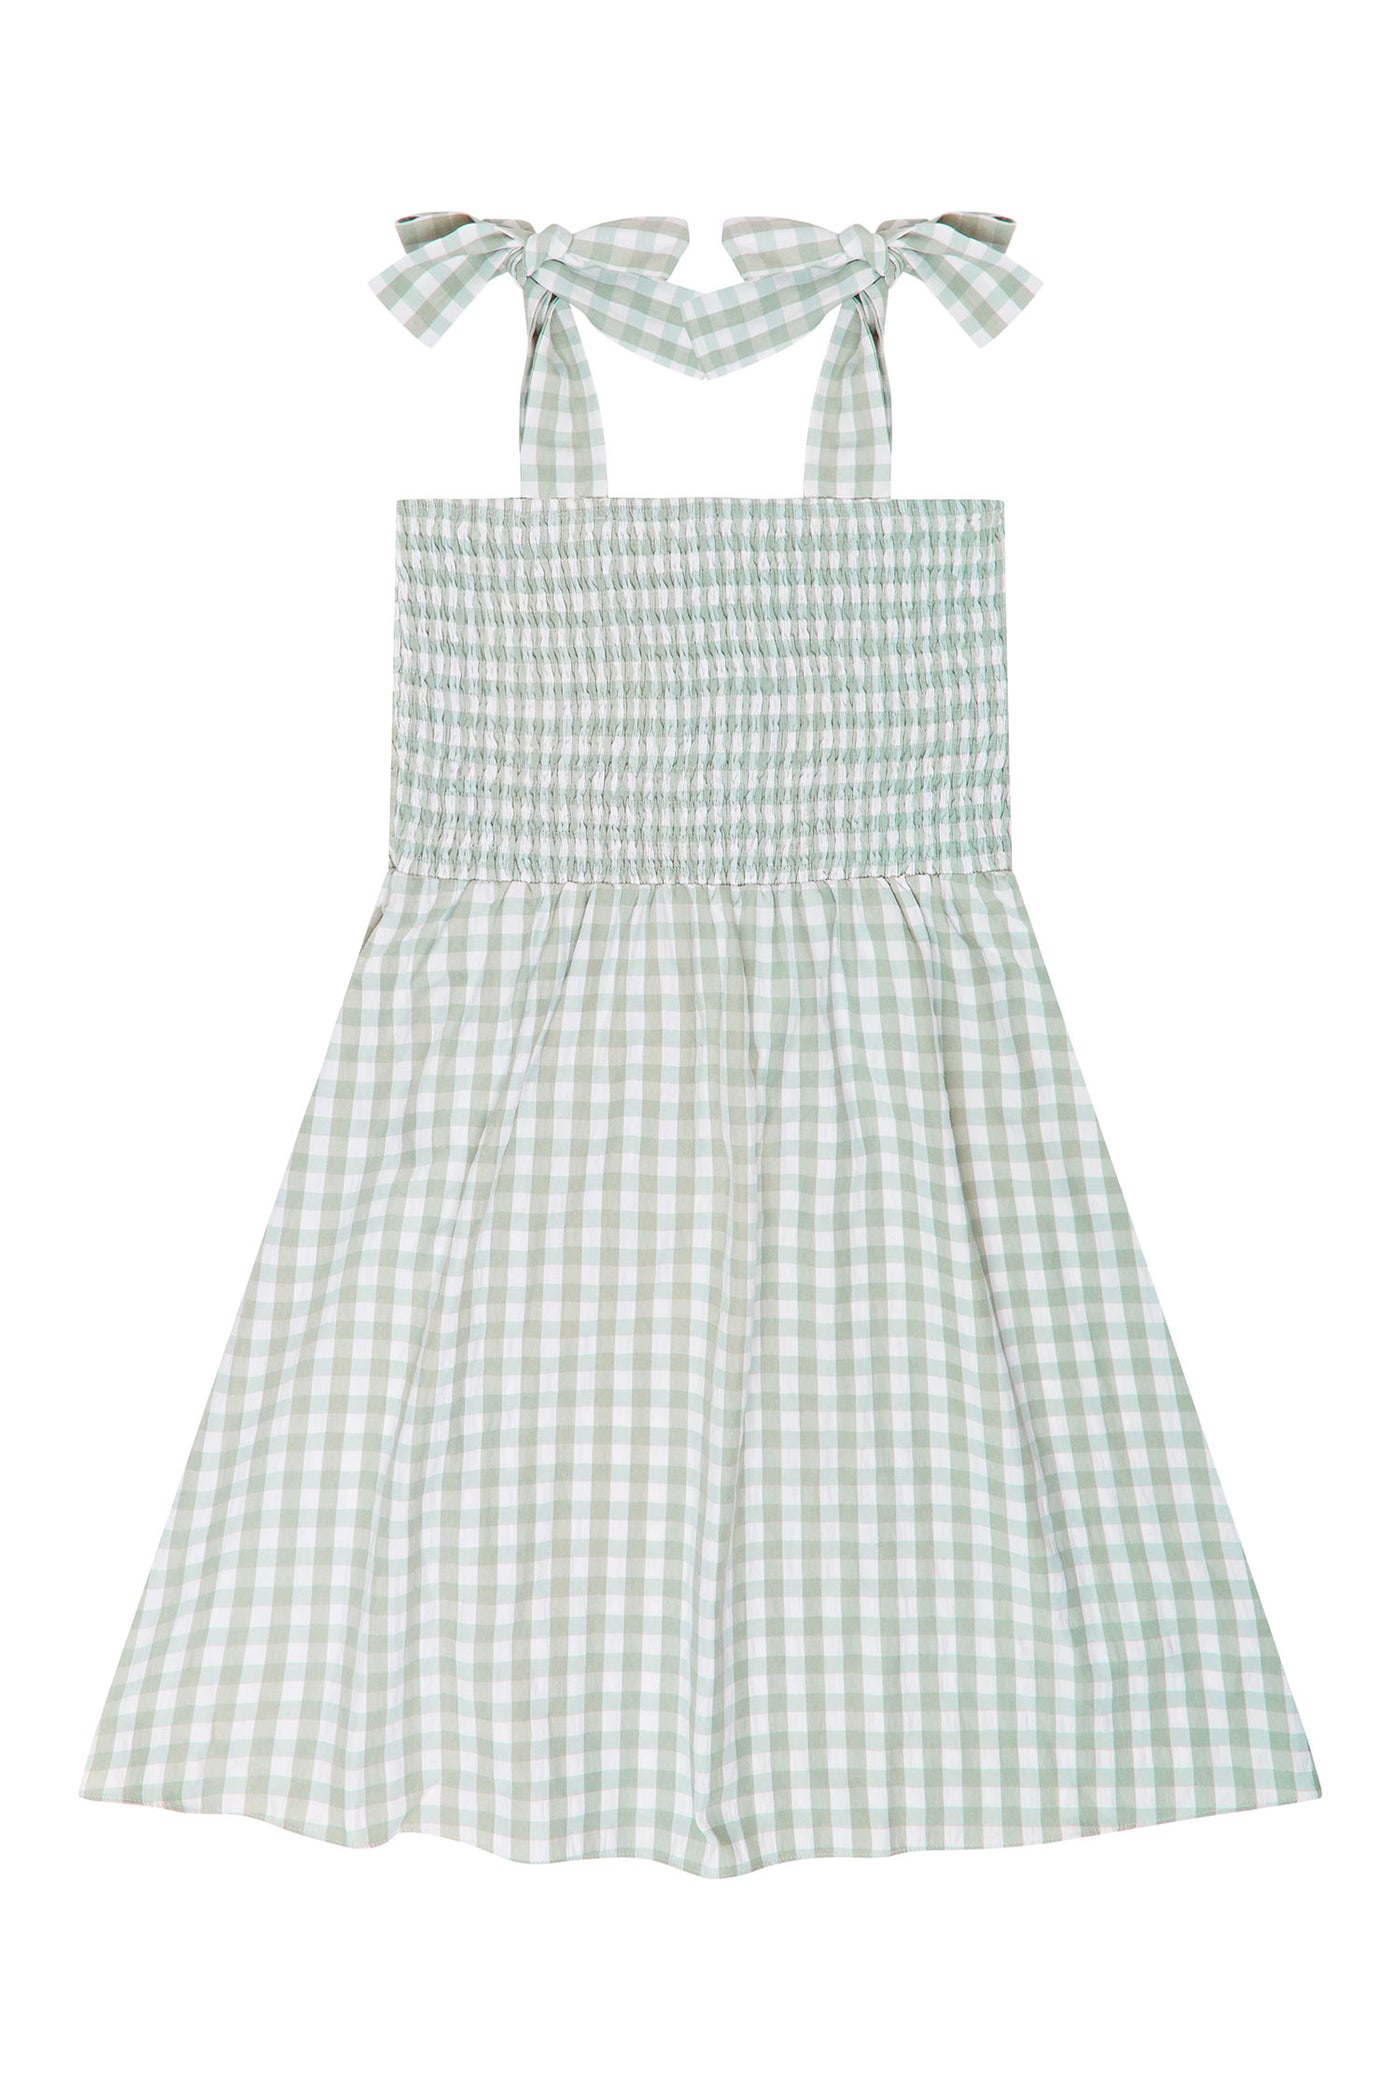 Green and white gingham dress